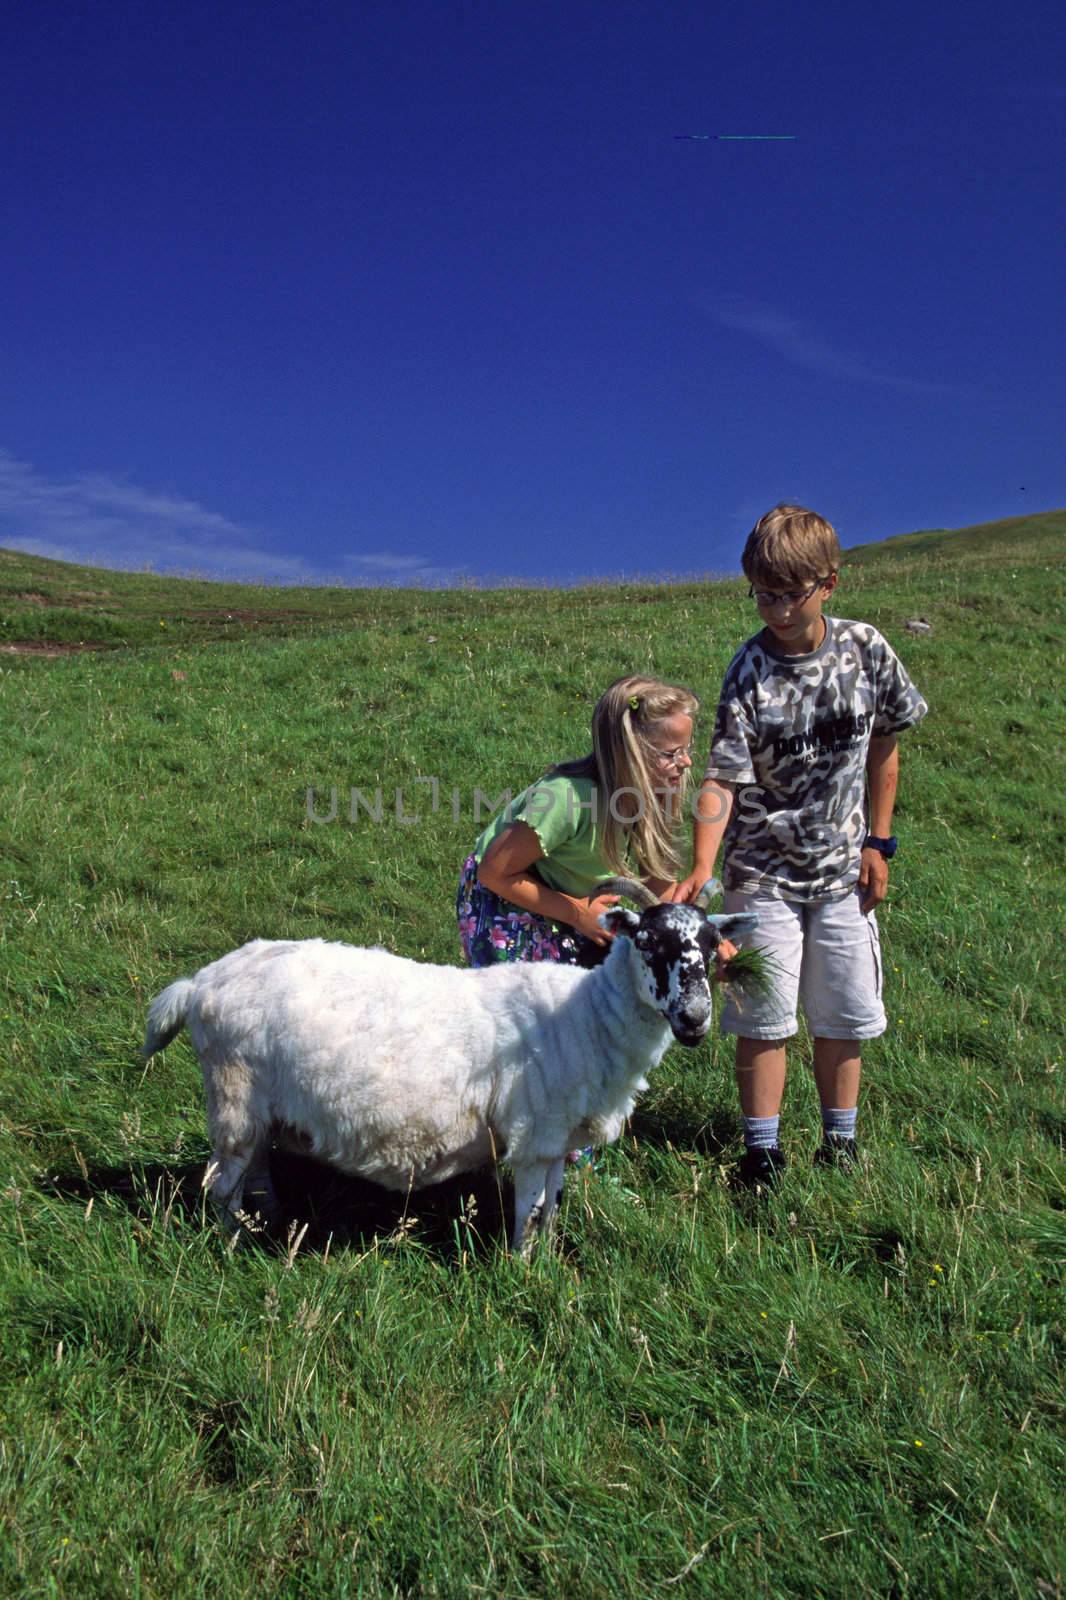 Children with sheep in Scotland by Natureandmore